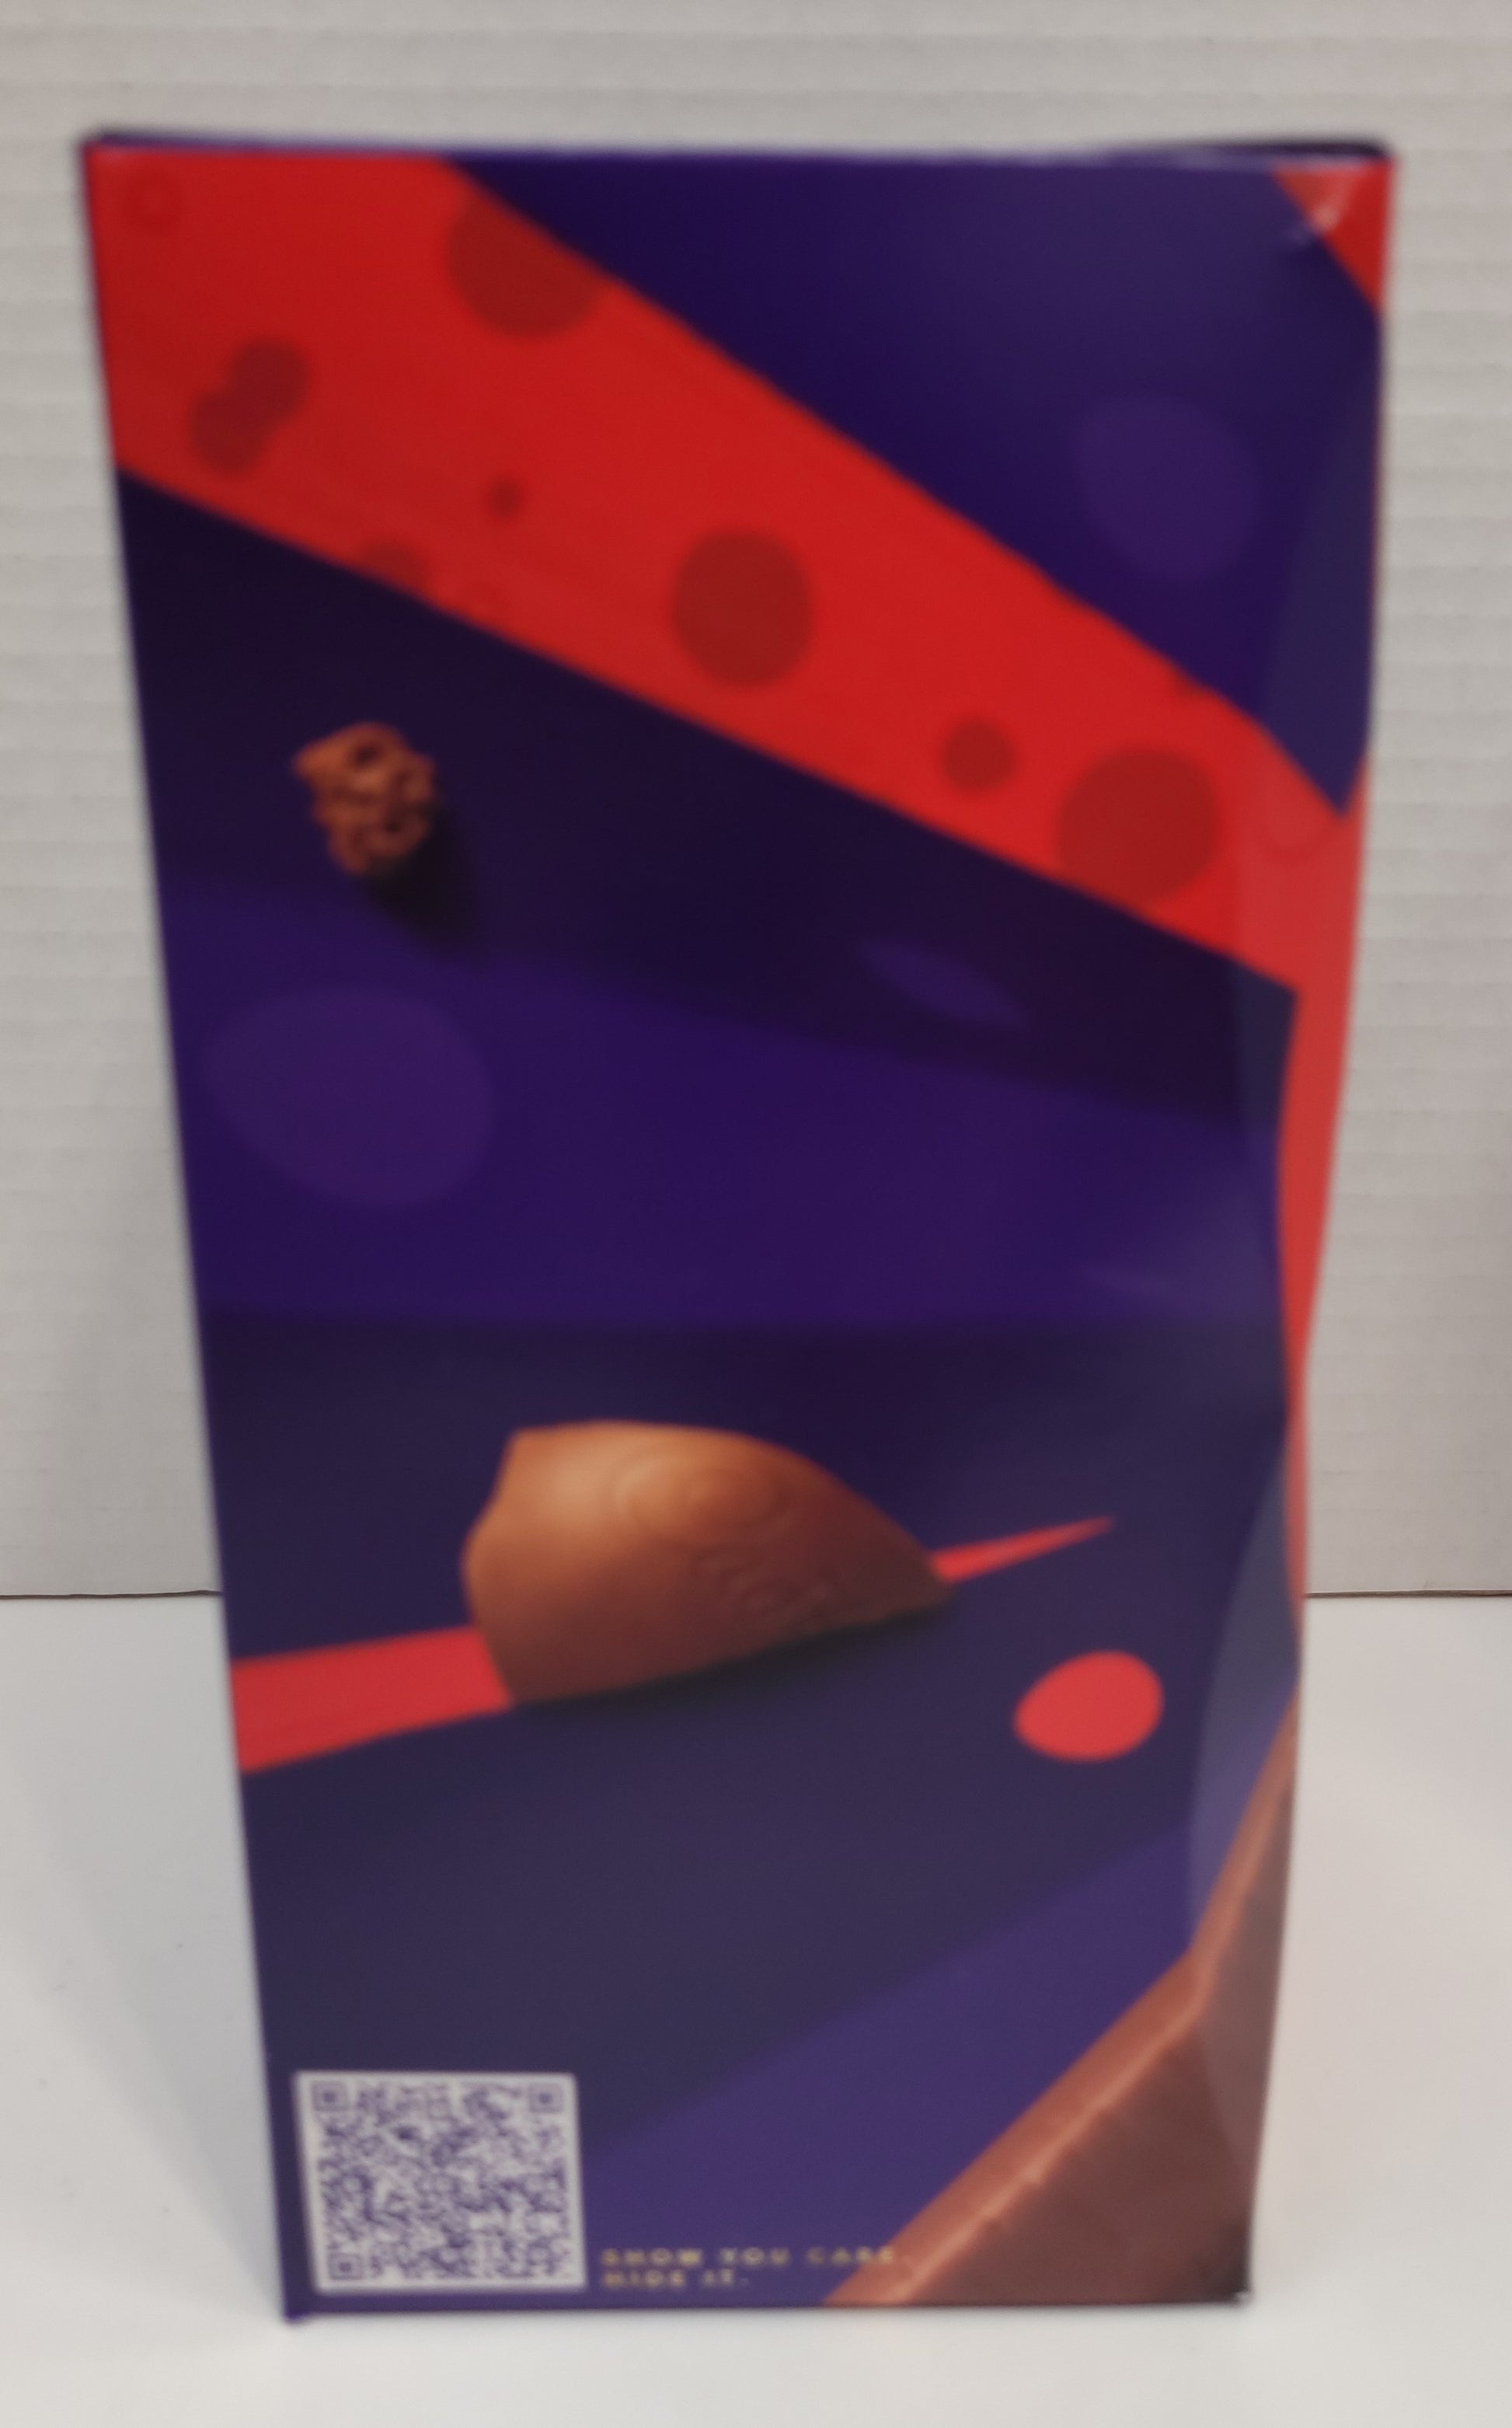 Side view of Box - A yummy hollow chocolate egg made with the world-famous Cadbury Dairy Milk chocolate. The chocolate egg is filled with 1 Cadbury Wispa chocolate bar.   Box contains one Cadbury Dairy Milk hollow chocolate egg and two bars of textured milk chocolate.   152G   Imported from the UK. 